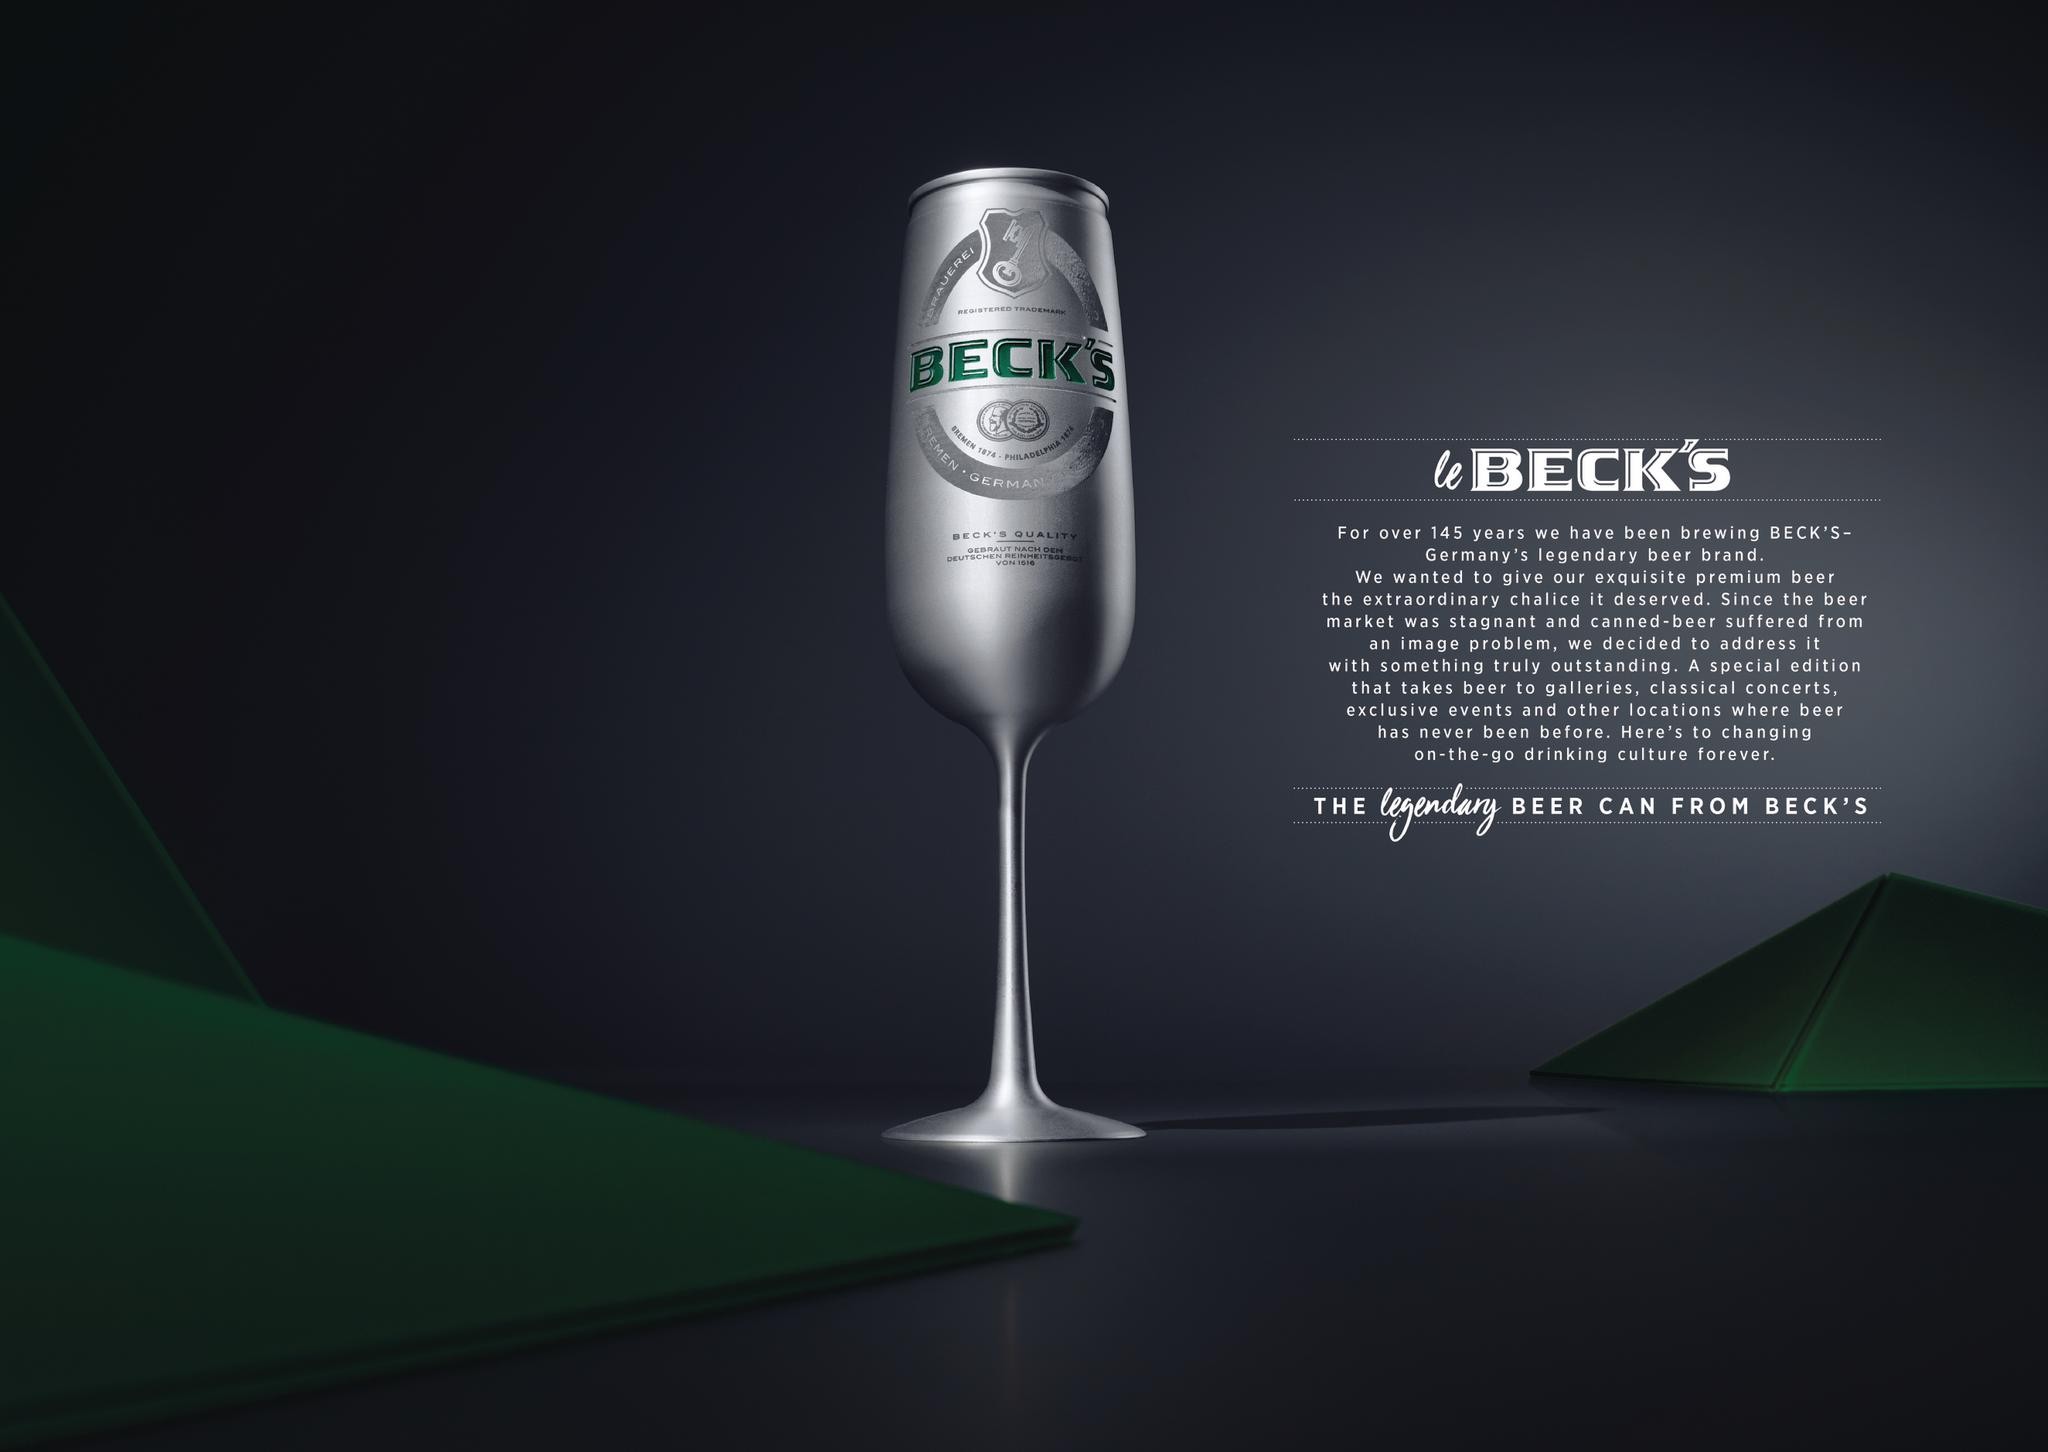 Le Beck's: The legendary beer can